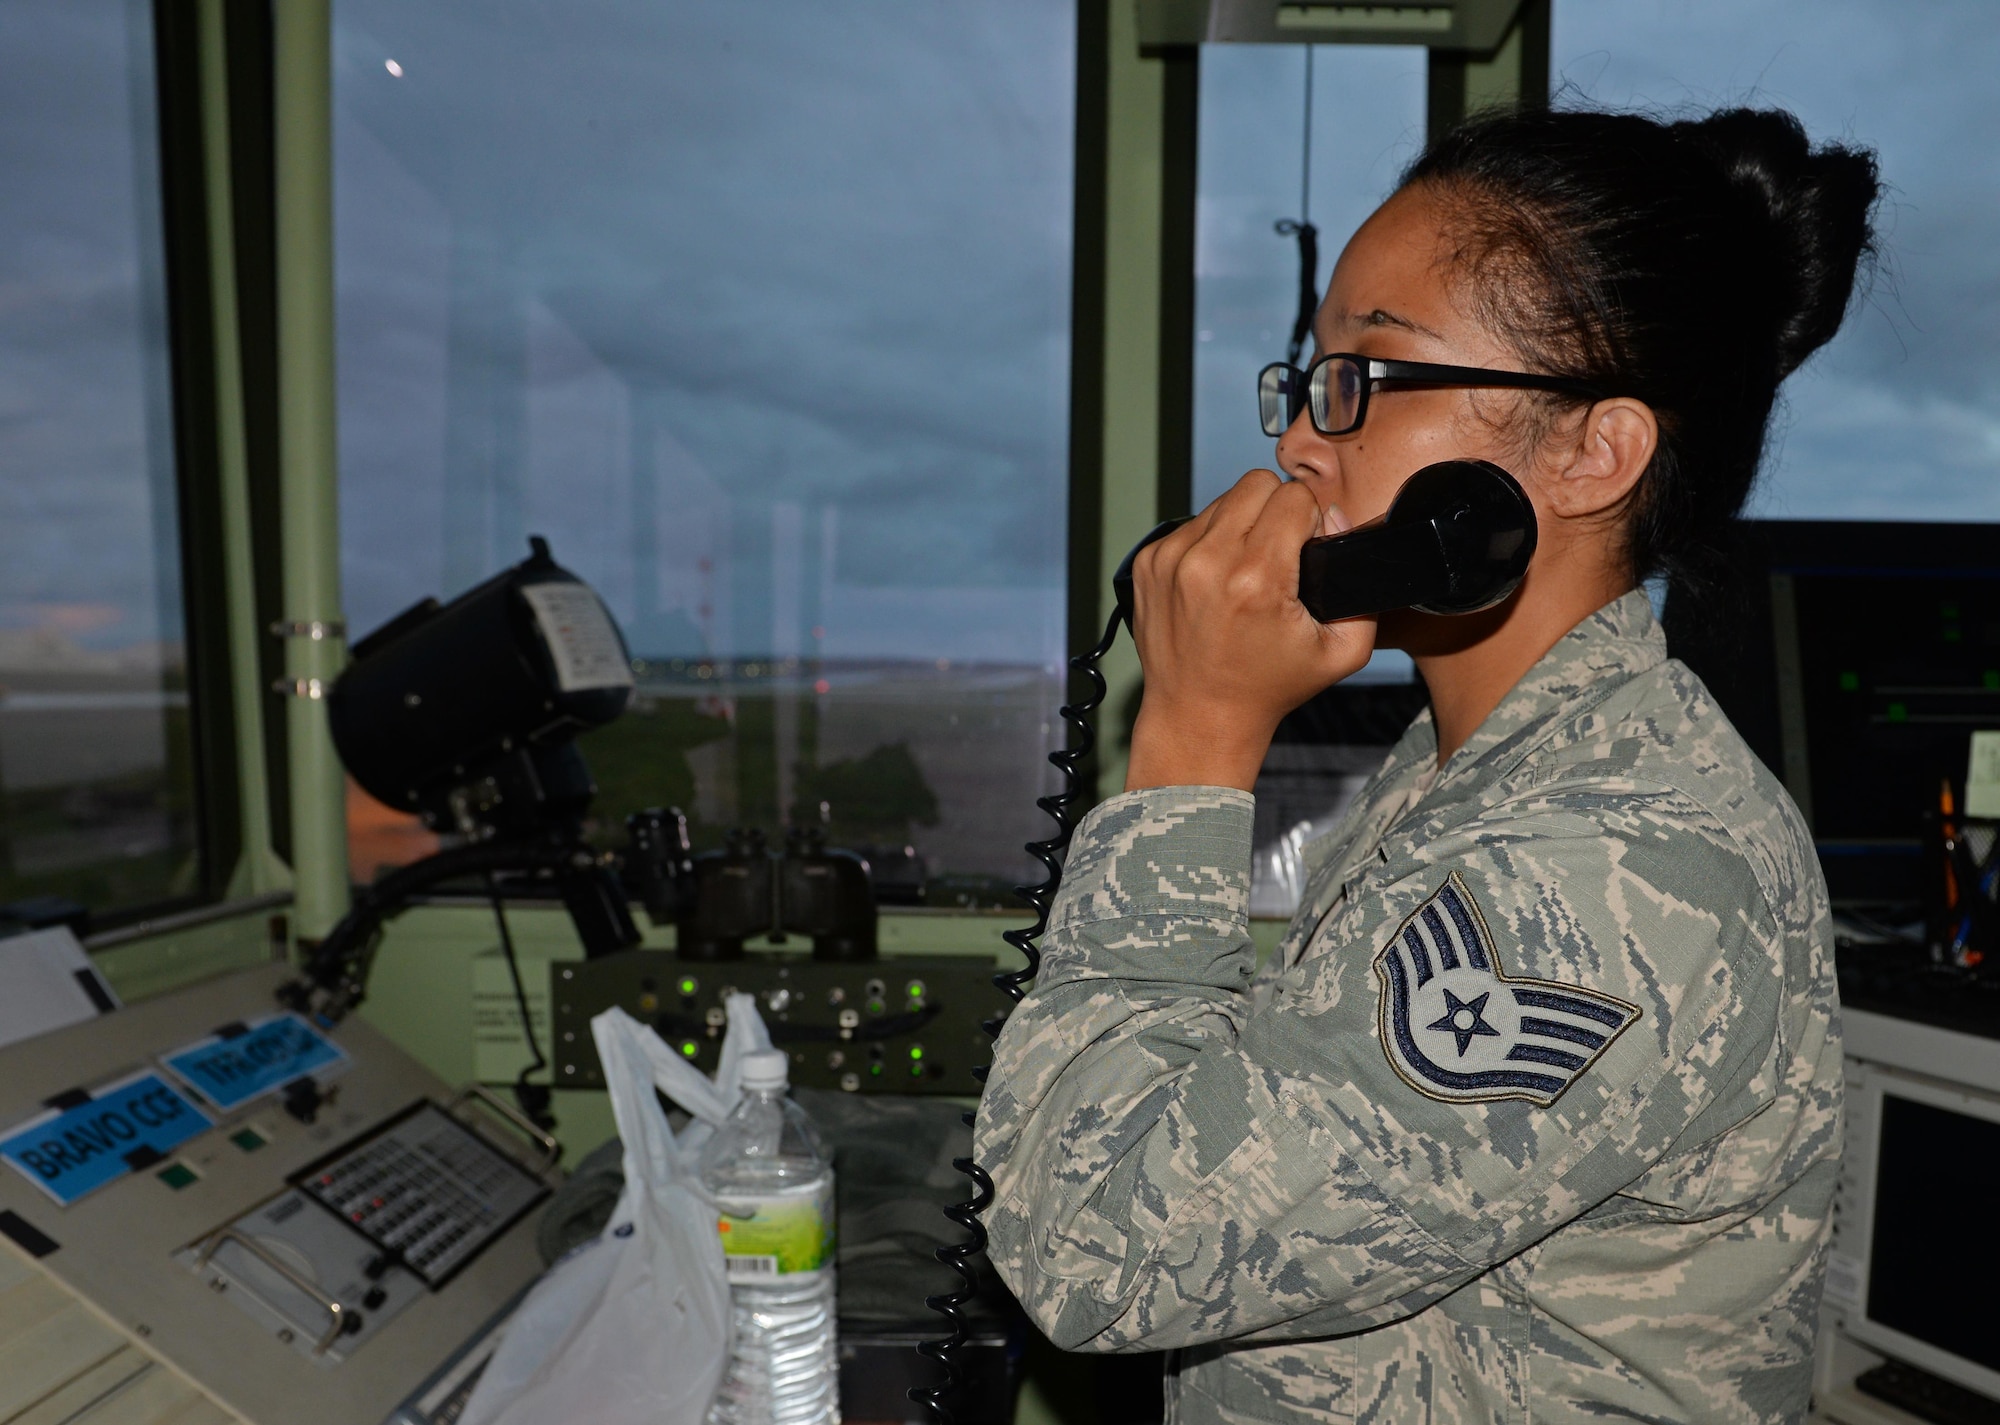 U.S. Air Force Staff Sgt. Tiffany Degracia, 36th Operation Support Squadron air traffic controller communicates via radio with pilots preparing to take off June 20, 2017, at Andersen Air Force Base, Guam. Air traffic control Airmen assigned to the 36th Operation Support Squadron began work in the new tower cab here June 30 after spending almost three months working in the mobile tower unit on the flightline. (U.S. Air Force photo by Senior Airman Alexa Ann Henderson)